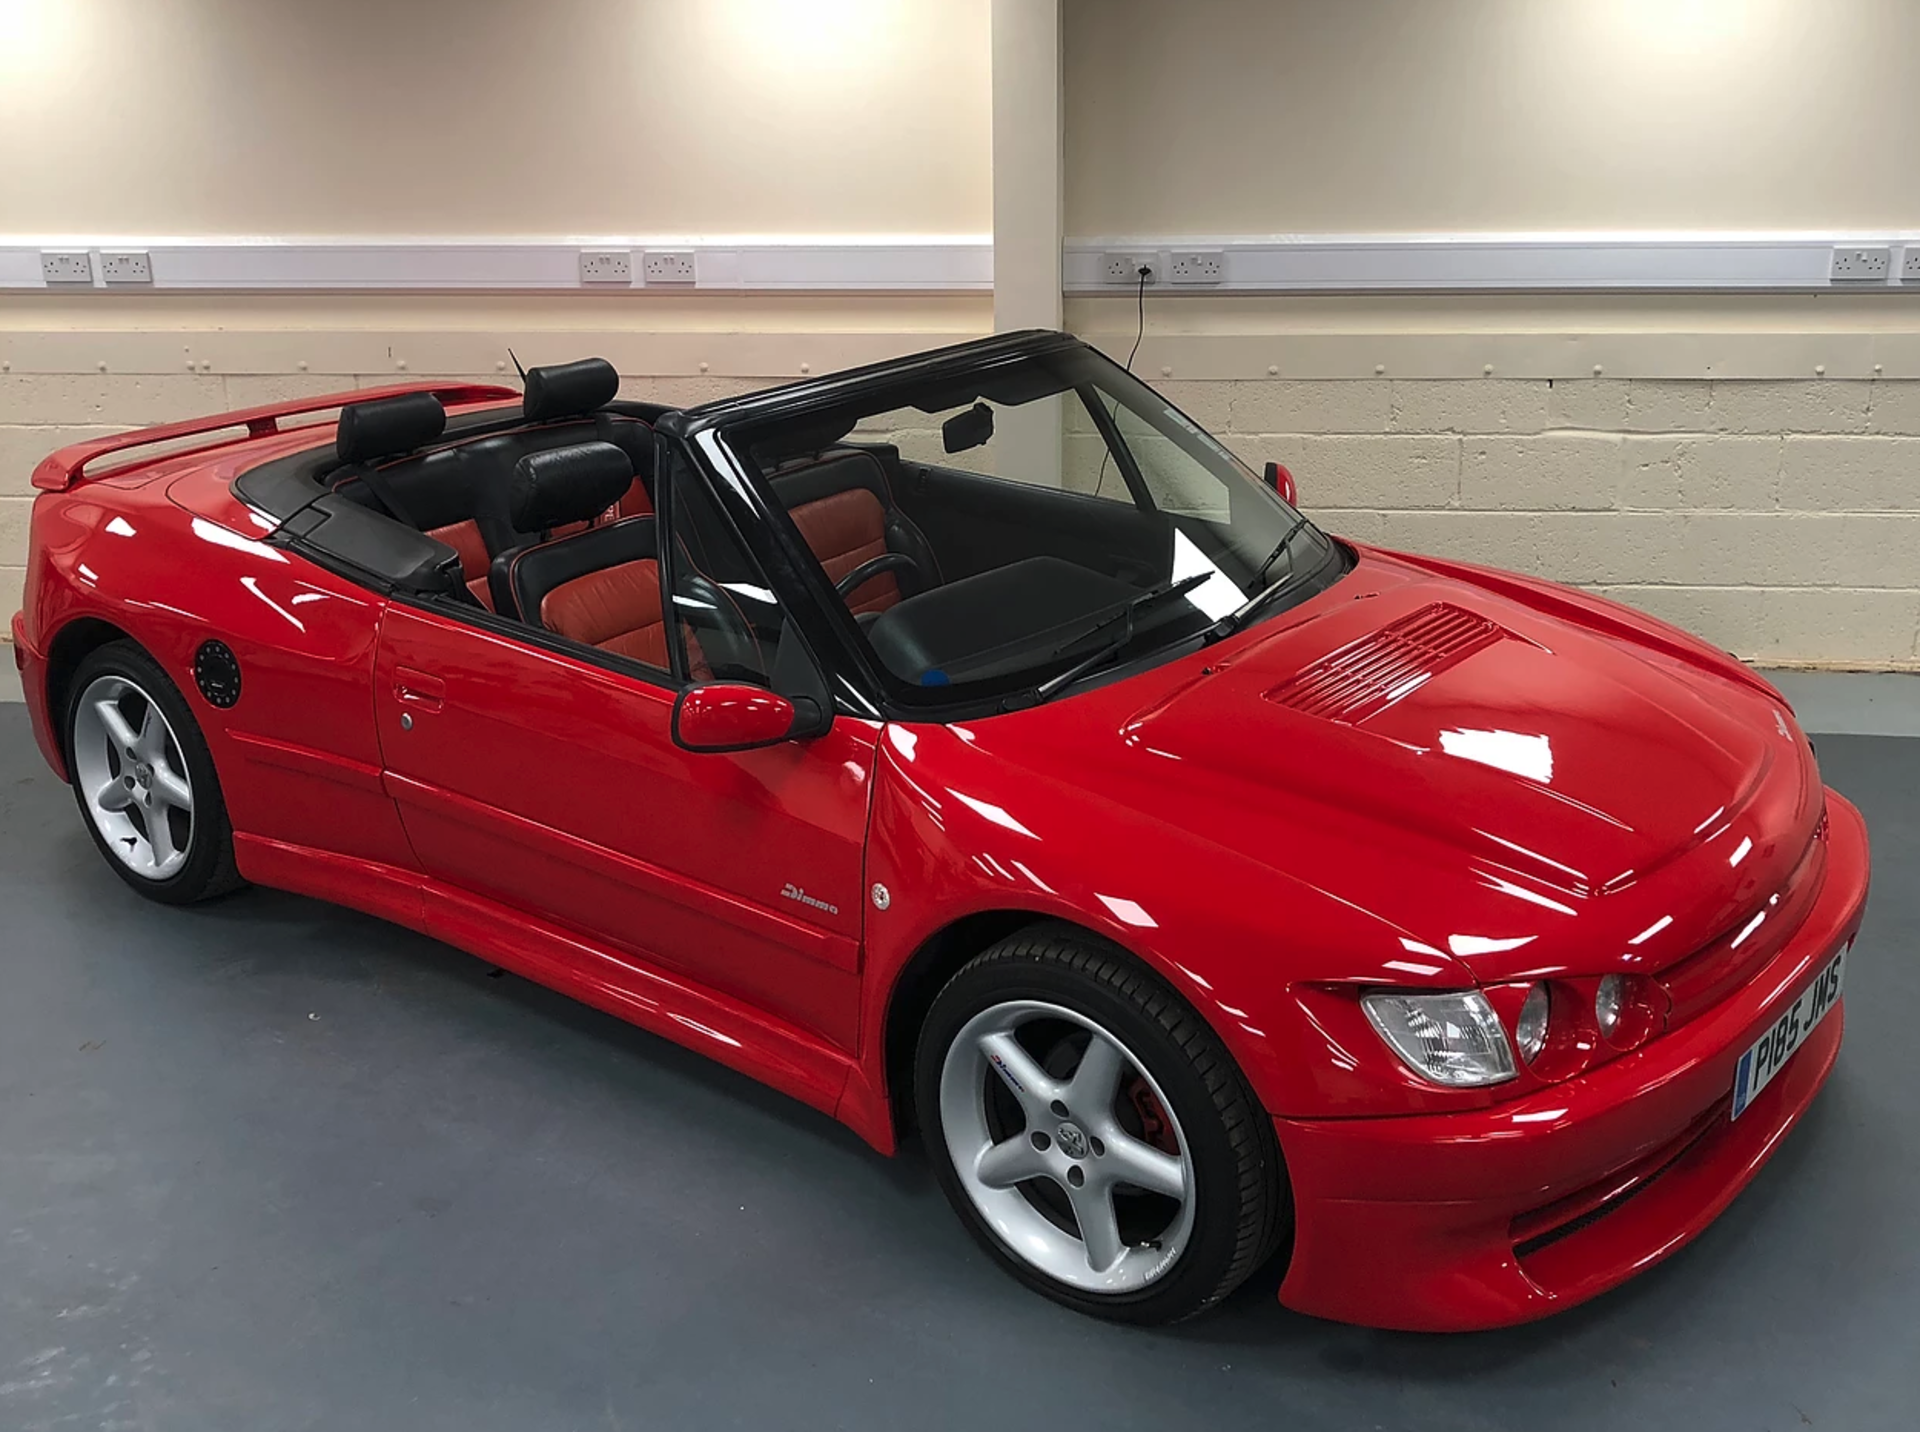 Peugeot 306 2.0i Cabriolet - Dimma prototype. Number 1 of only 2 ever built. - Image 6 of 13